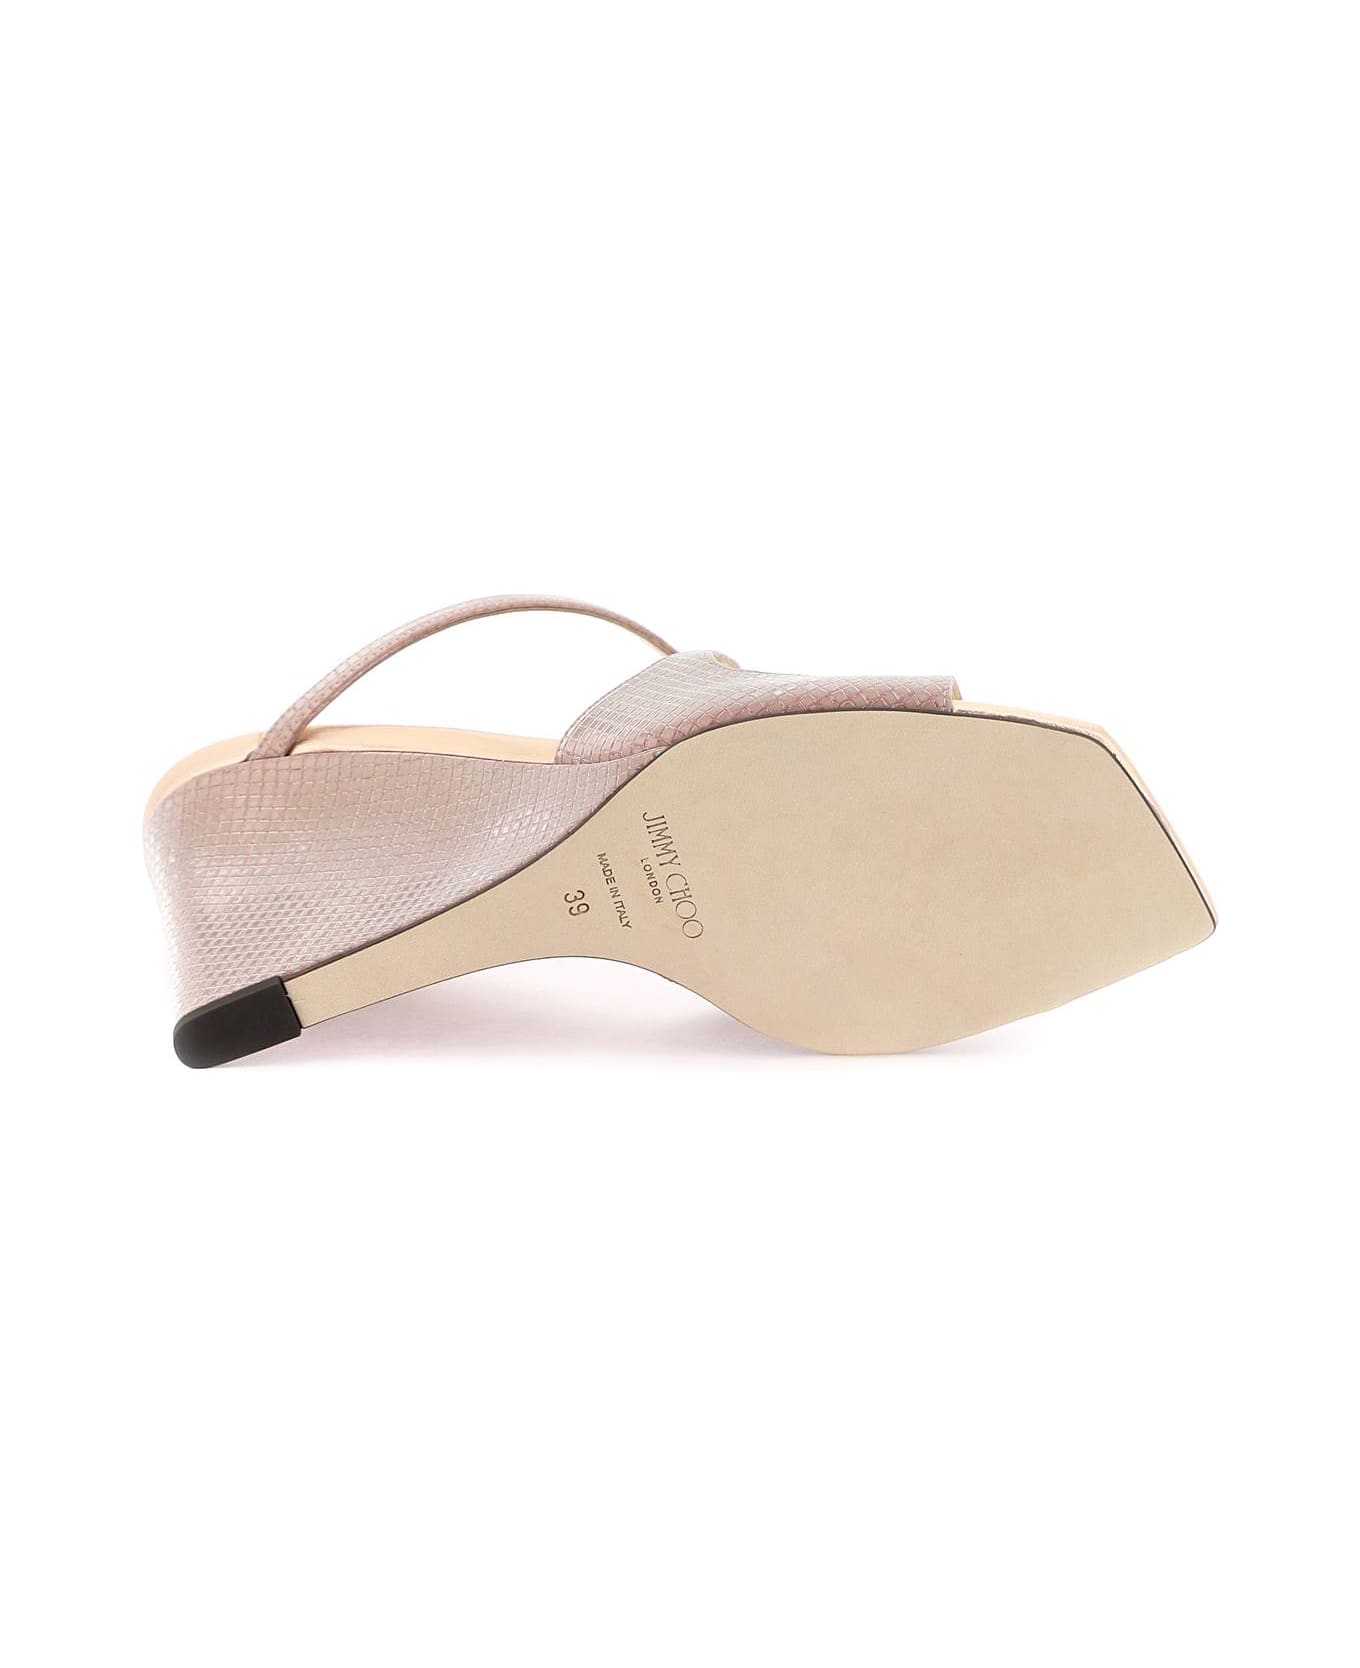 Jimmy Choo 'anise Wedge 85' Mules - BALLET PINK (Pink)